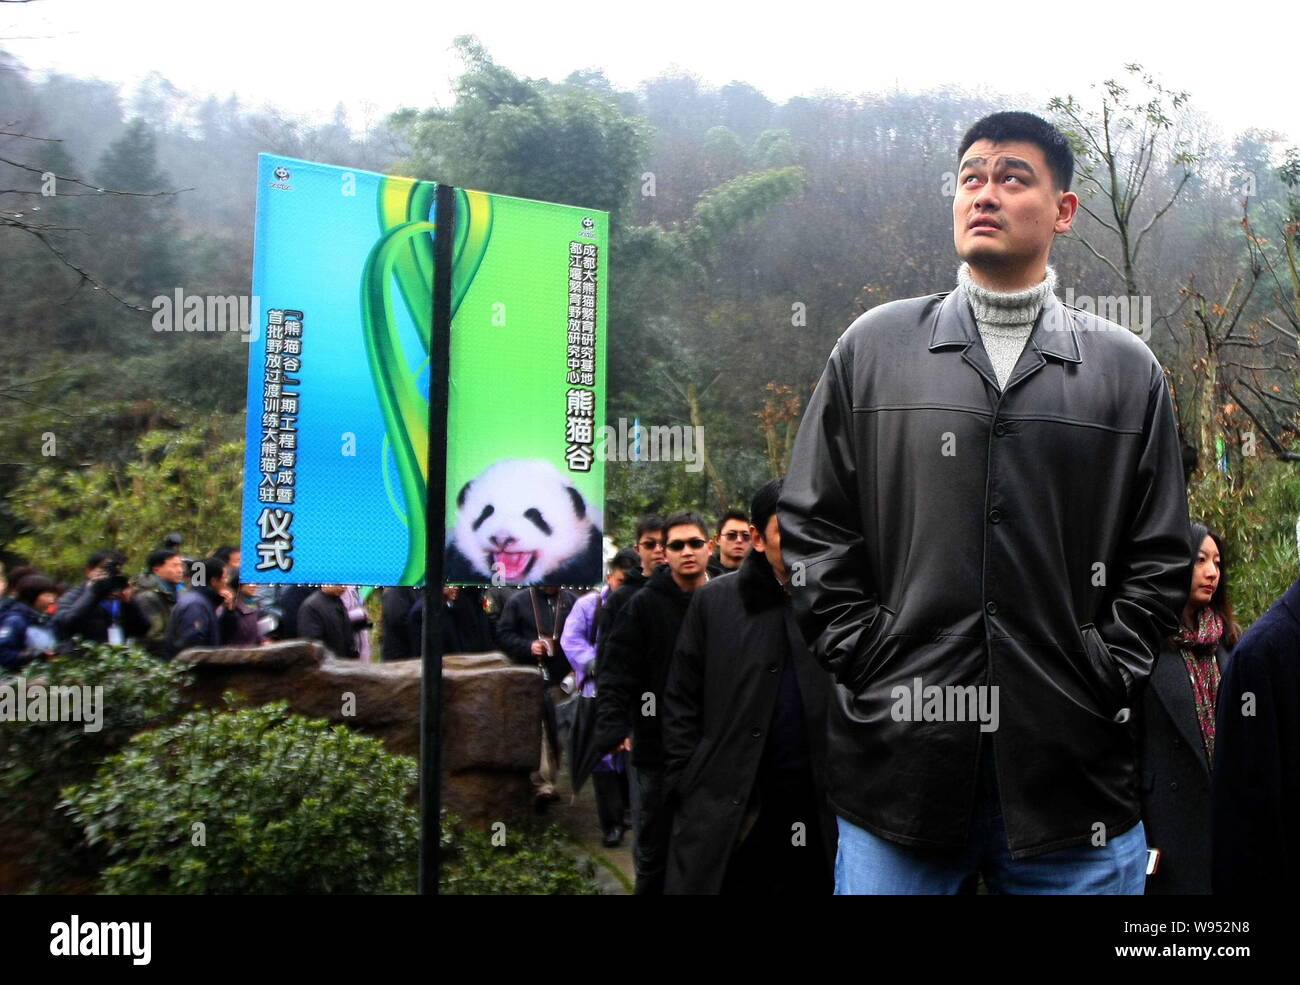 Retired Chinese basketball superstar Yao Ming is pictured at the Chengdu Research Base of Giant Panda Breeding in Chengdu city, southwest Chinas Sichu Stock Photo